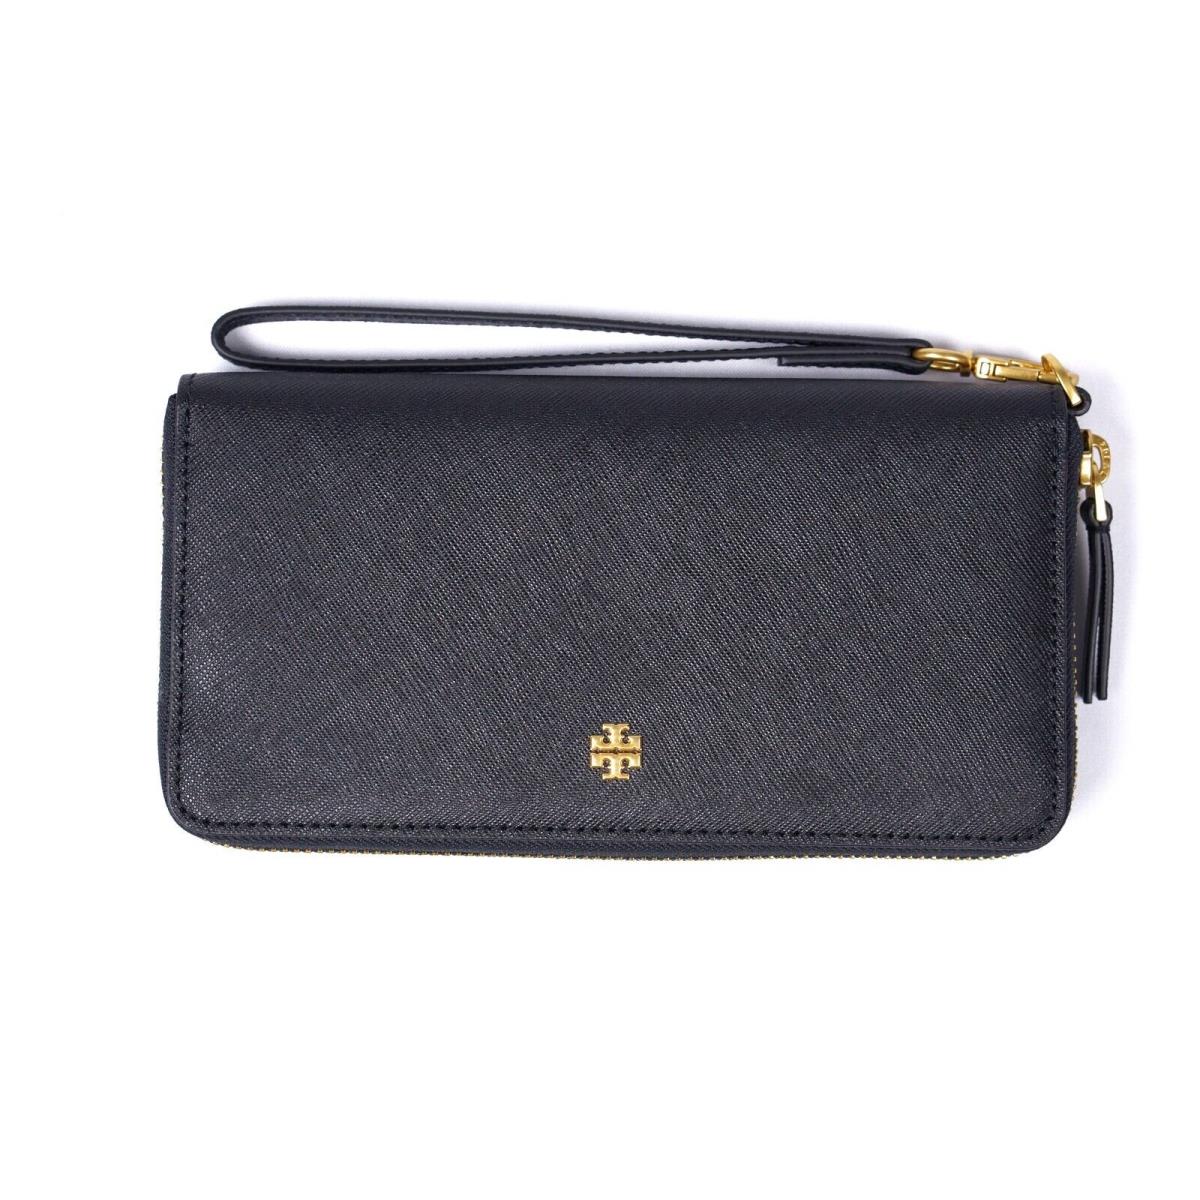 Tory Burch Emerson Black Saffiano Leather Wristlet Continental Wallet 136110